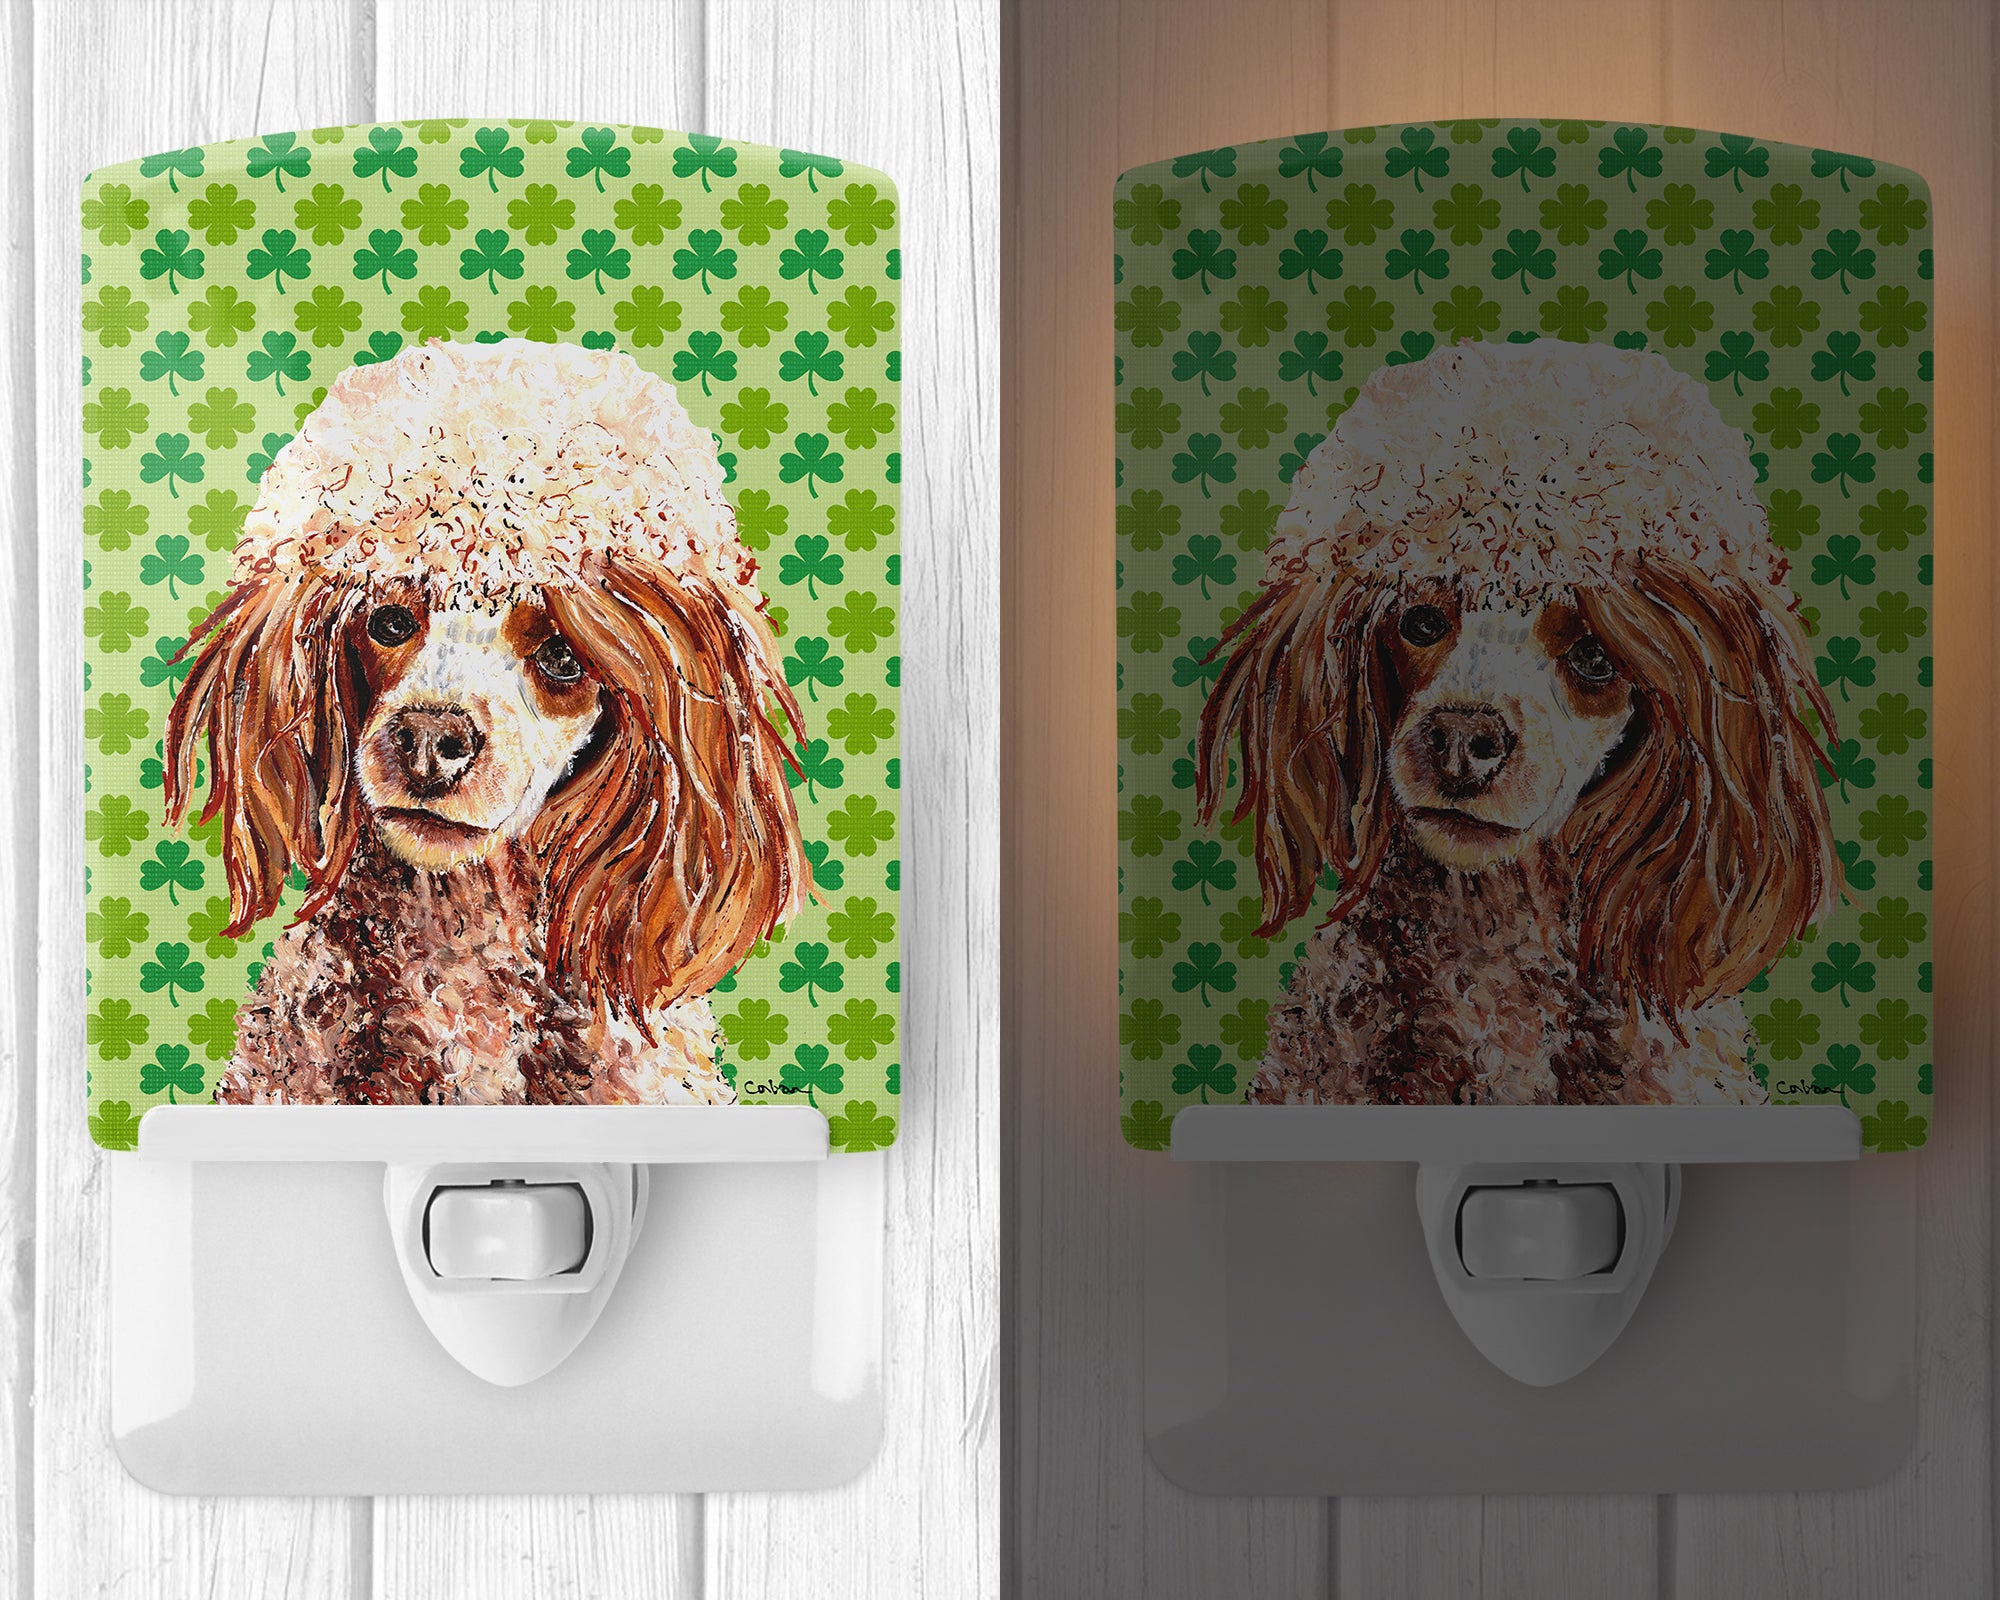 Red Miniature Poodle Lucky Shamrock St. Patrick's Day Ceramic Night Light SC9723CNL - the-store.com